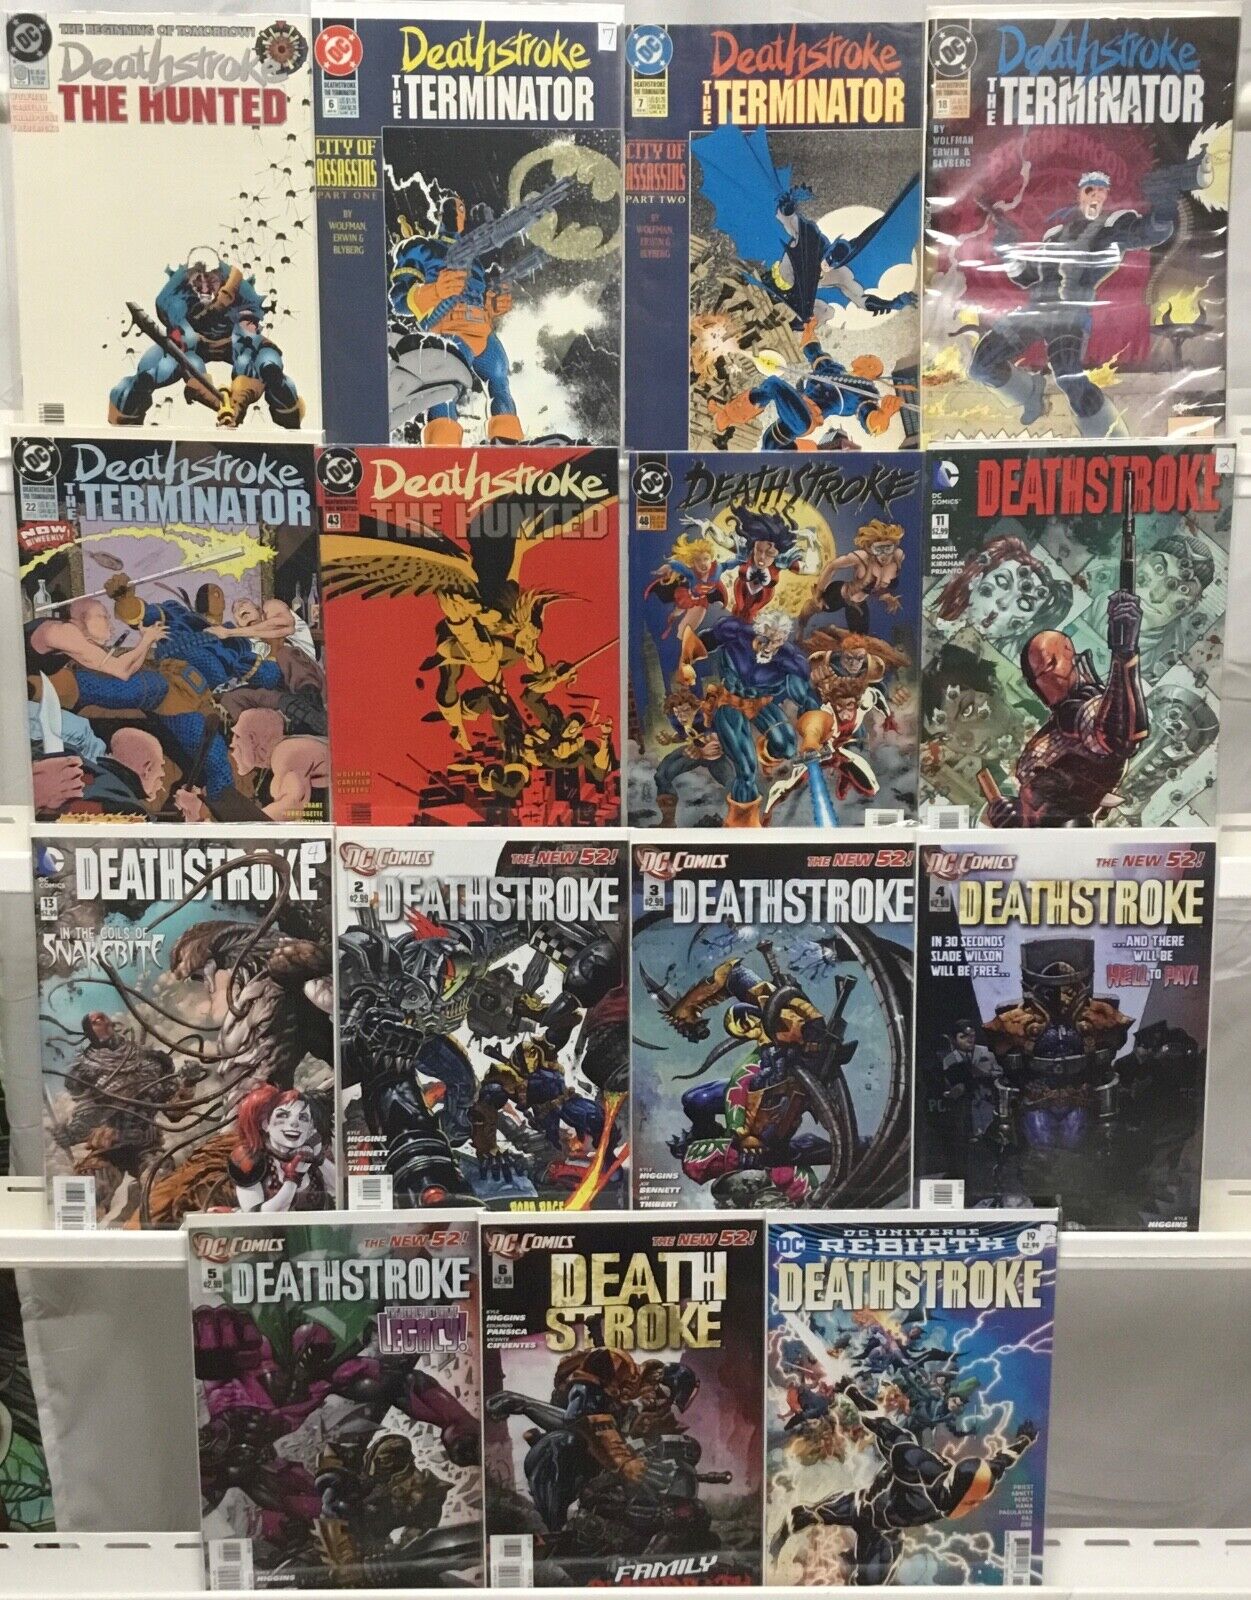 DC Comics - Deathstroke the Terminator - Comic Book Lot of 15 Issues